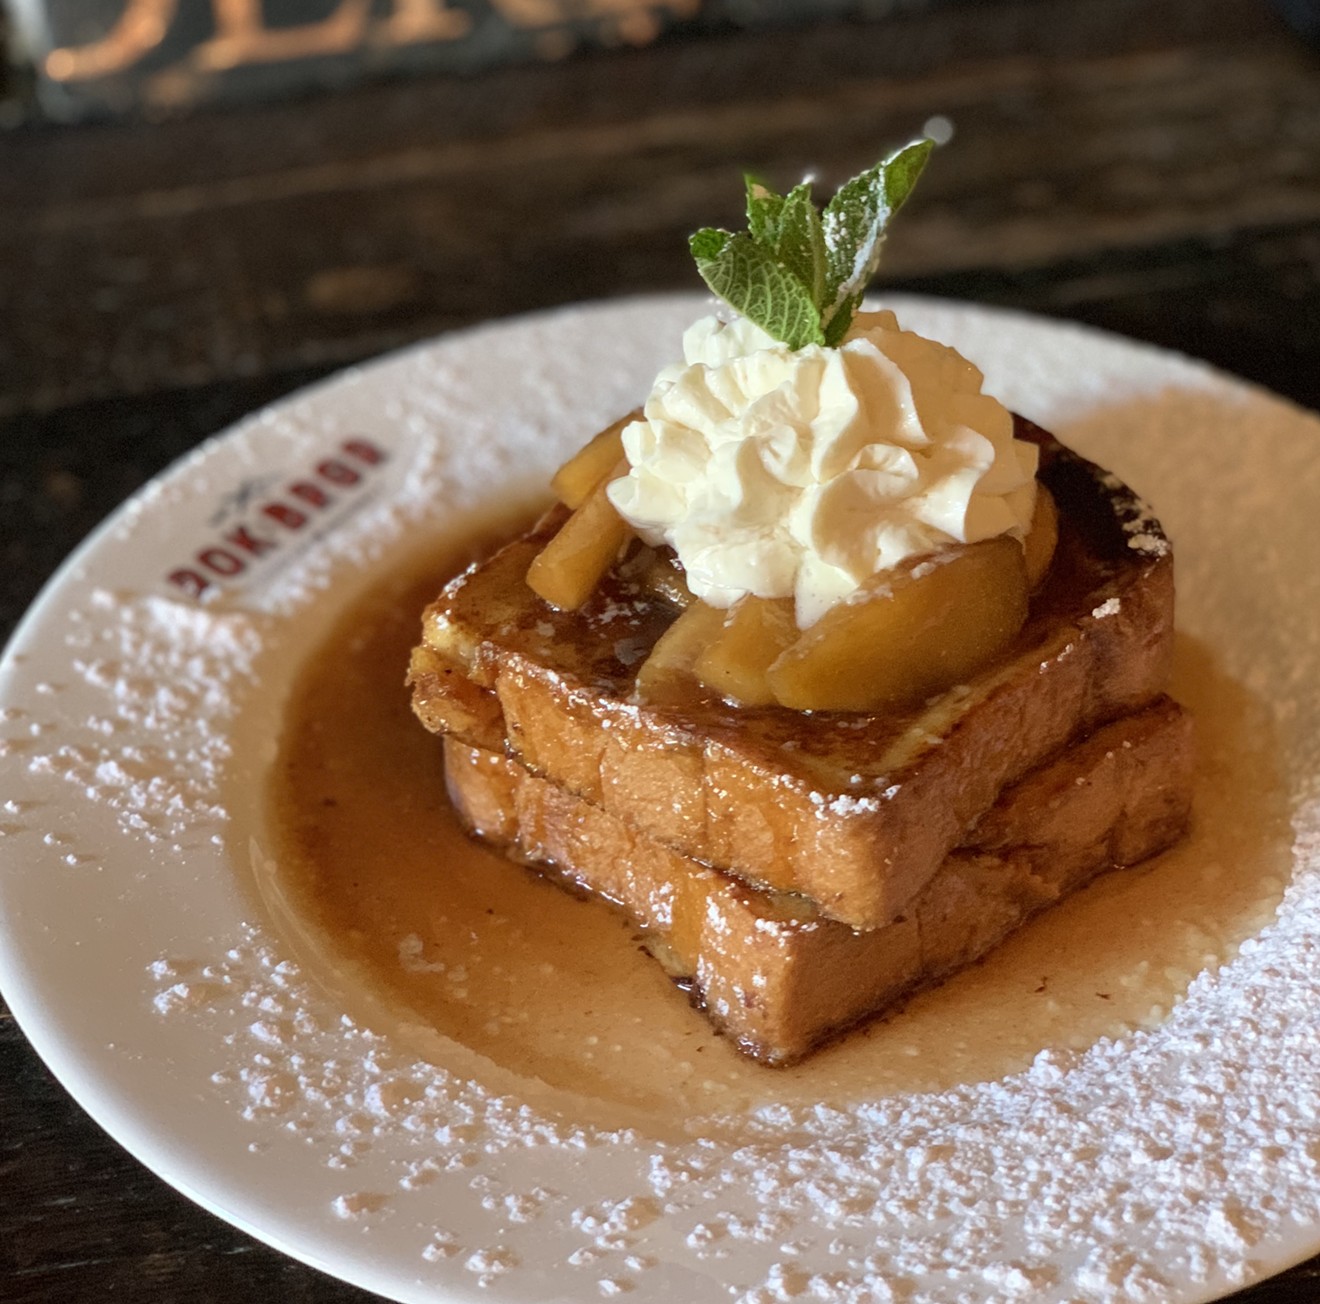 Caramel apple French toast is new to the menu.